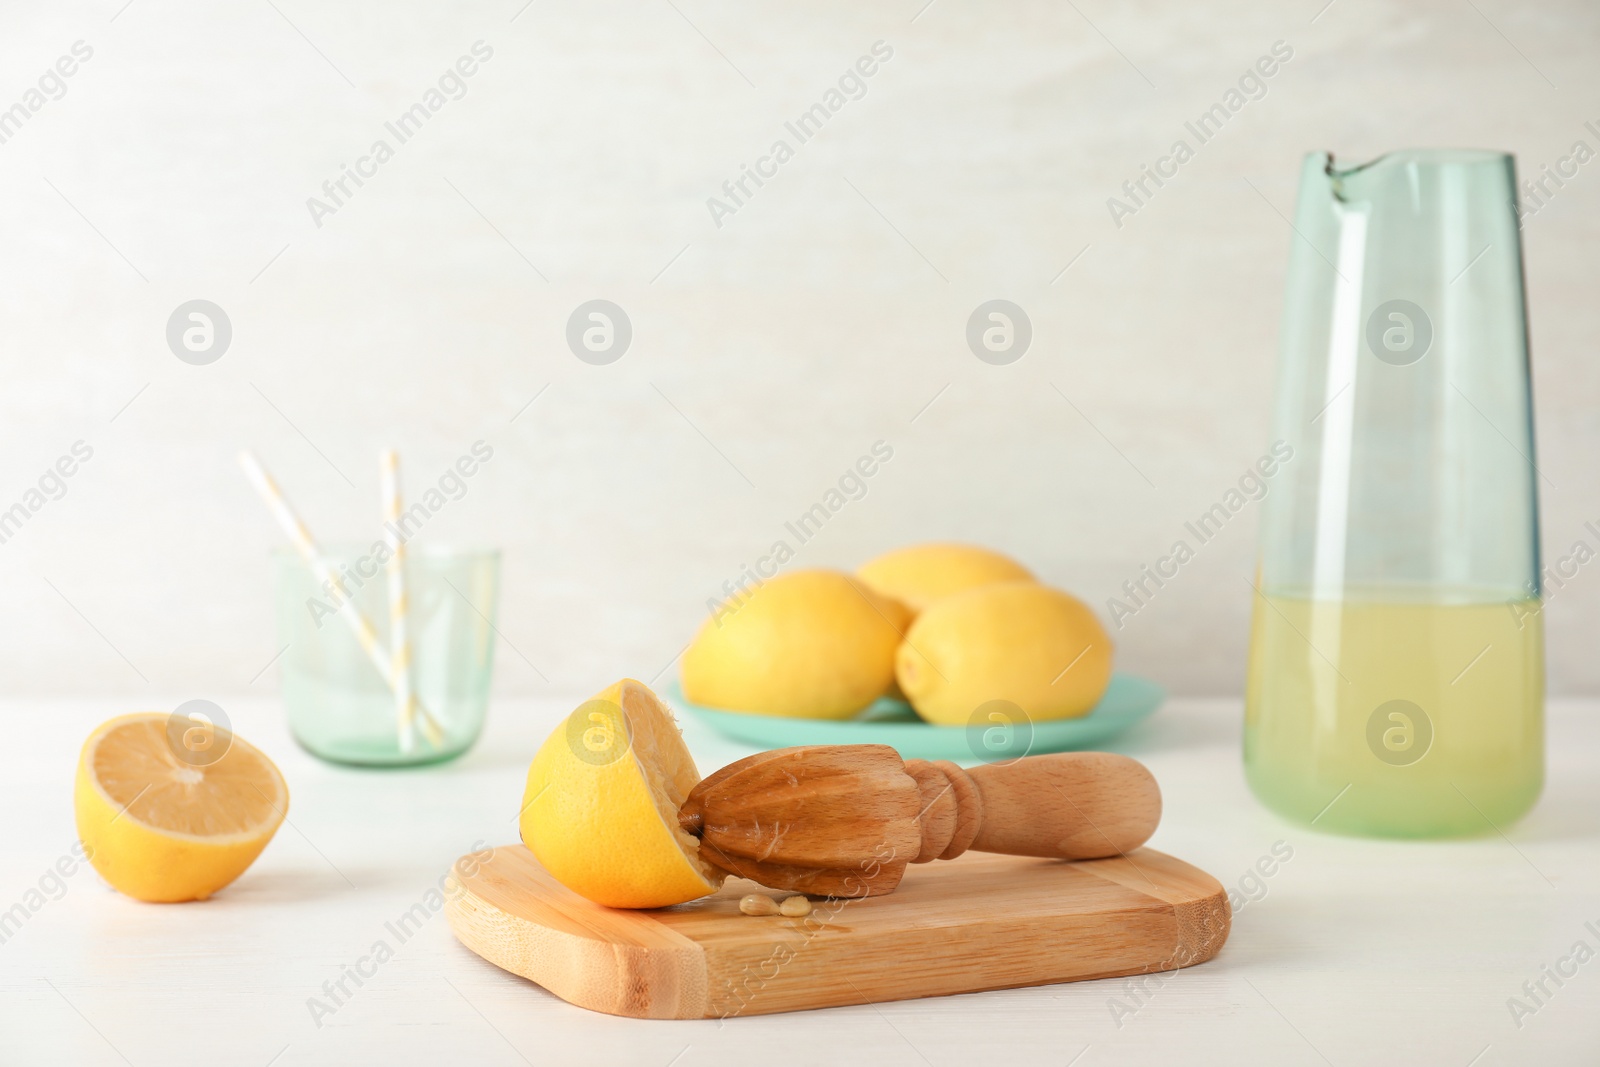 Photo of Composition with lemon half and wooden juicer on table